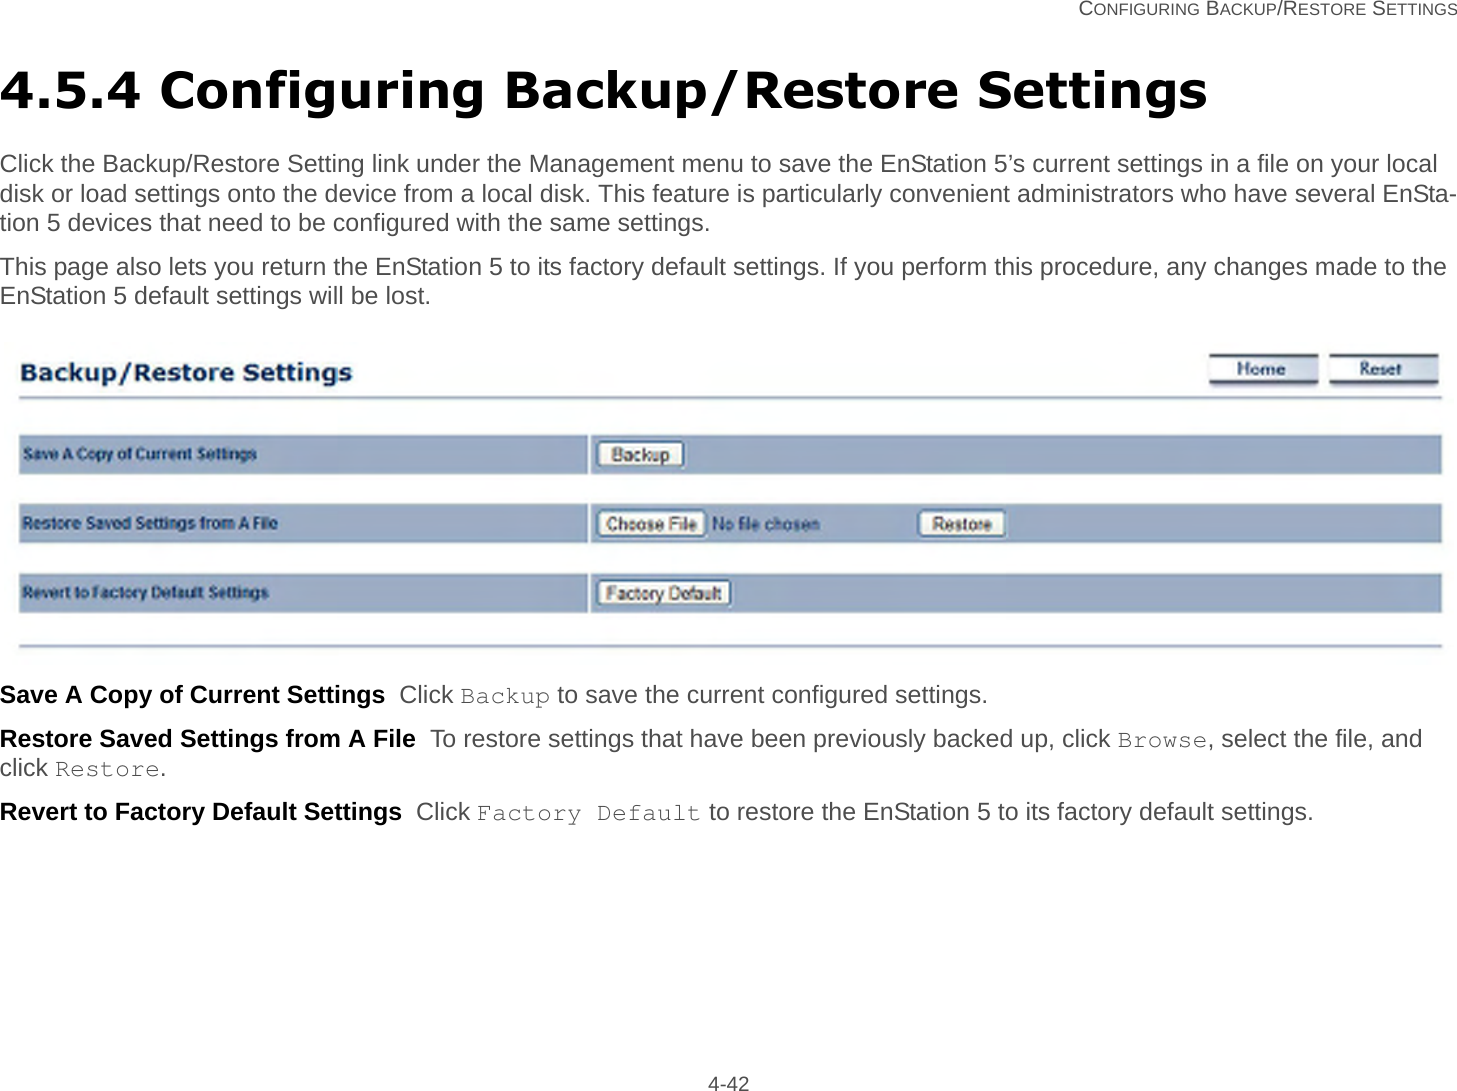   CONFIGURING BACKUP/RESTORE SETTINGS 4-424.5.4 Configuring Backup/Restore SettingsClick the Backup/Restore Setting link under the Management menu to save the EnStation 5’s current settings in a file on your local disk or load settings onto the device from a local disk. This feature is particularly convenient administrators who have several EnSta-tion 5 devices that need to be configured with the same settings.This page also lets you return the EnStation 5 to its factory default settings. If you perform this procedure, any changes made to the EnStation 5 default settings will be lost.Save A Copy of Current Settings  Click Backup to save the current configured settings.Restore Saved Settings from A File  To restore settings that have been previously backed up, click Browse, select the file, and click Restore.Revert to Factory Default Settings  Click Factory Default to restore the EnStation 5 to its factory default settings.